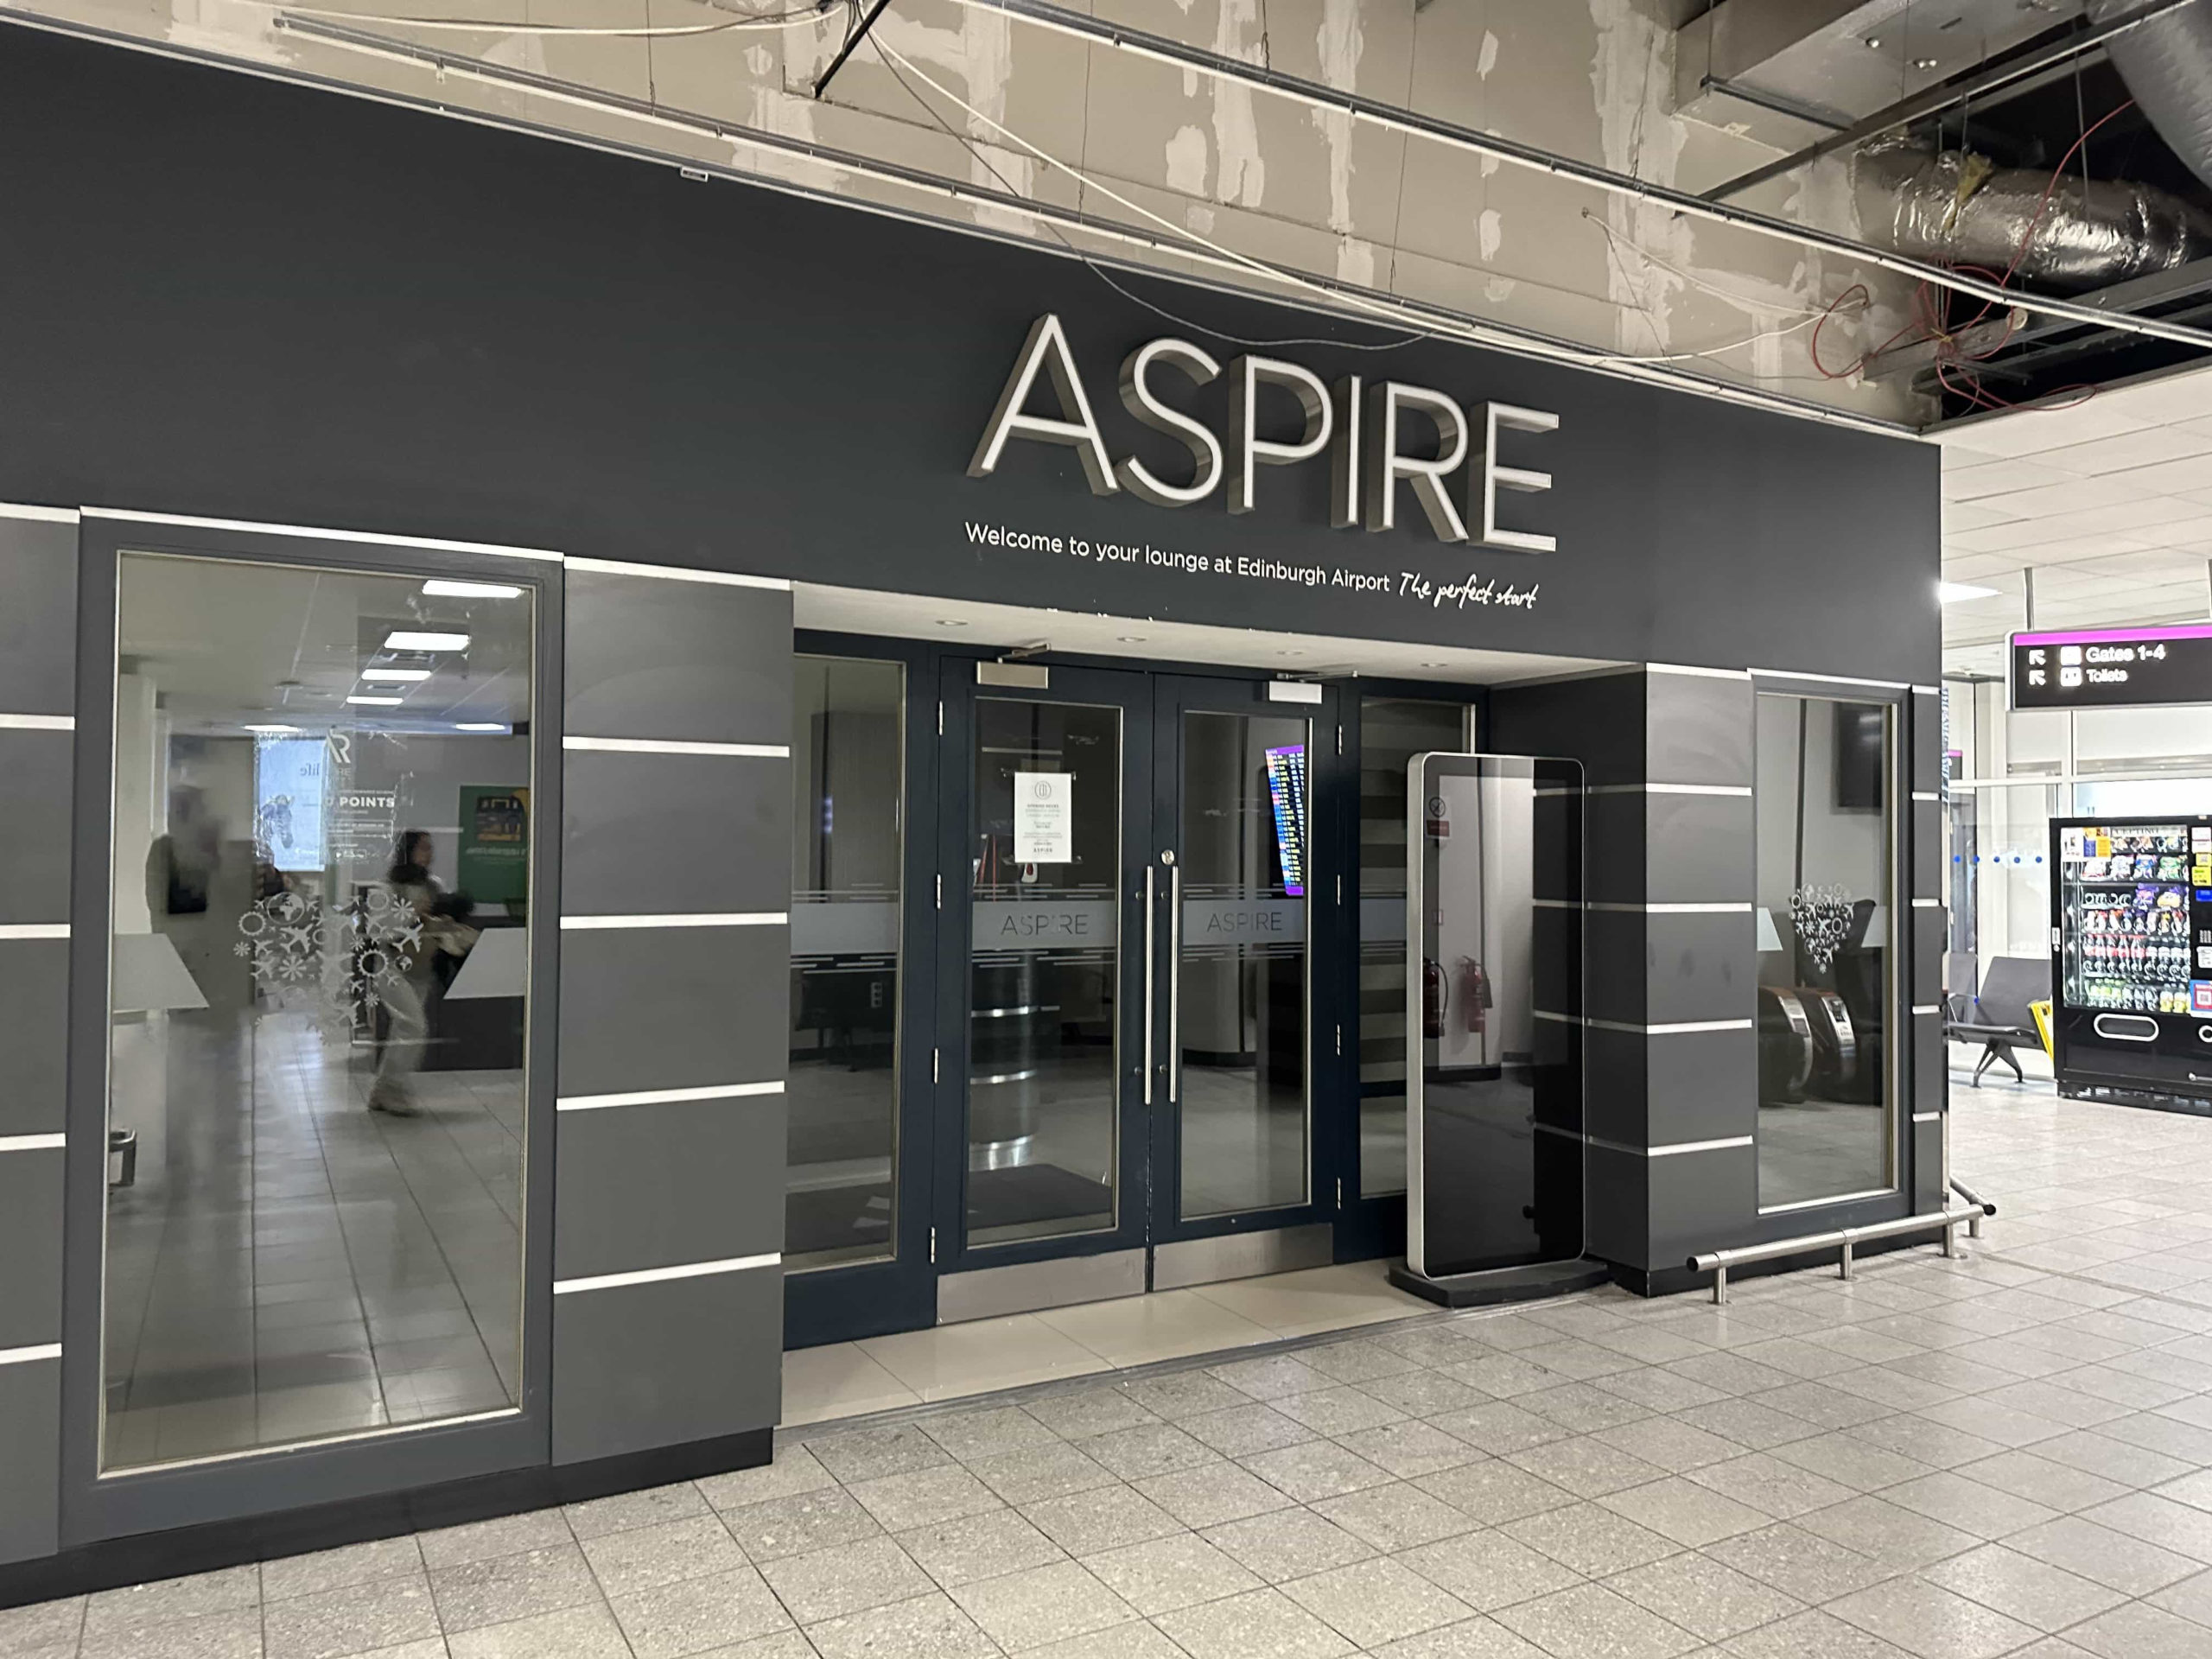 The entrance to the Aspire Lounge (gate 4) at Edinburgh Airport